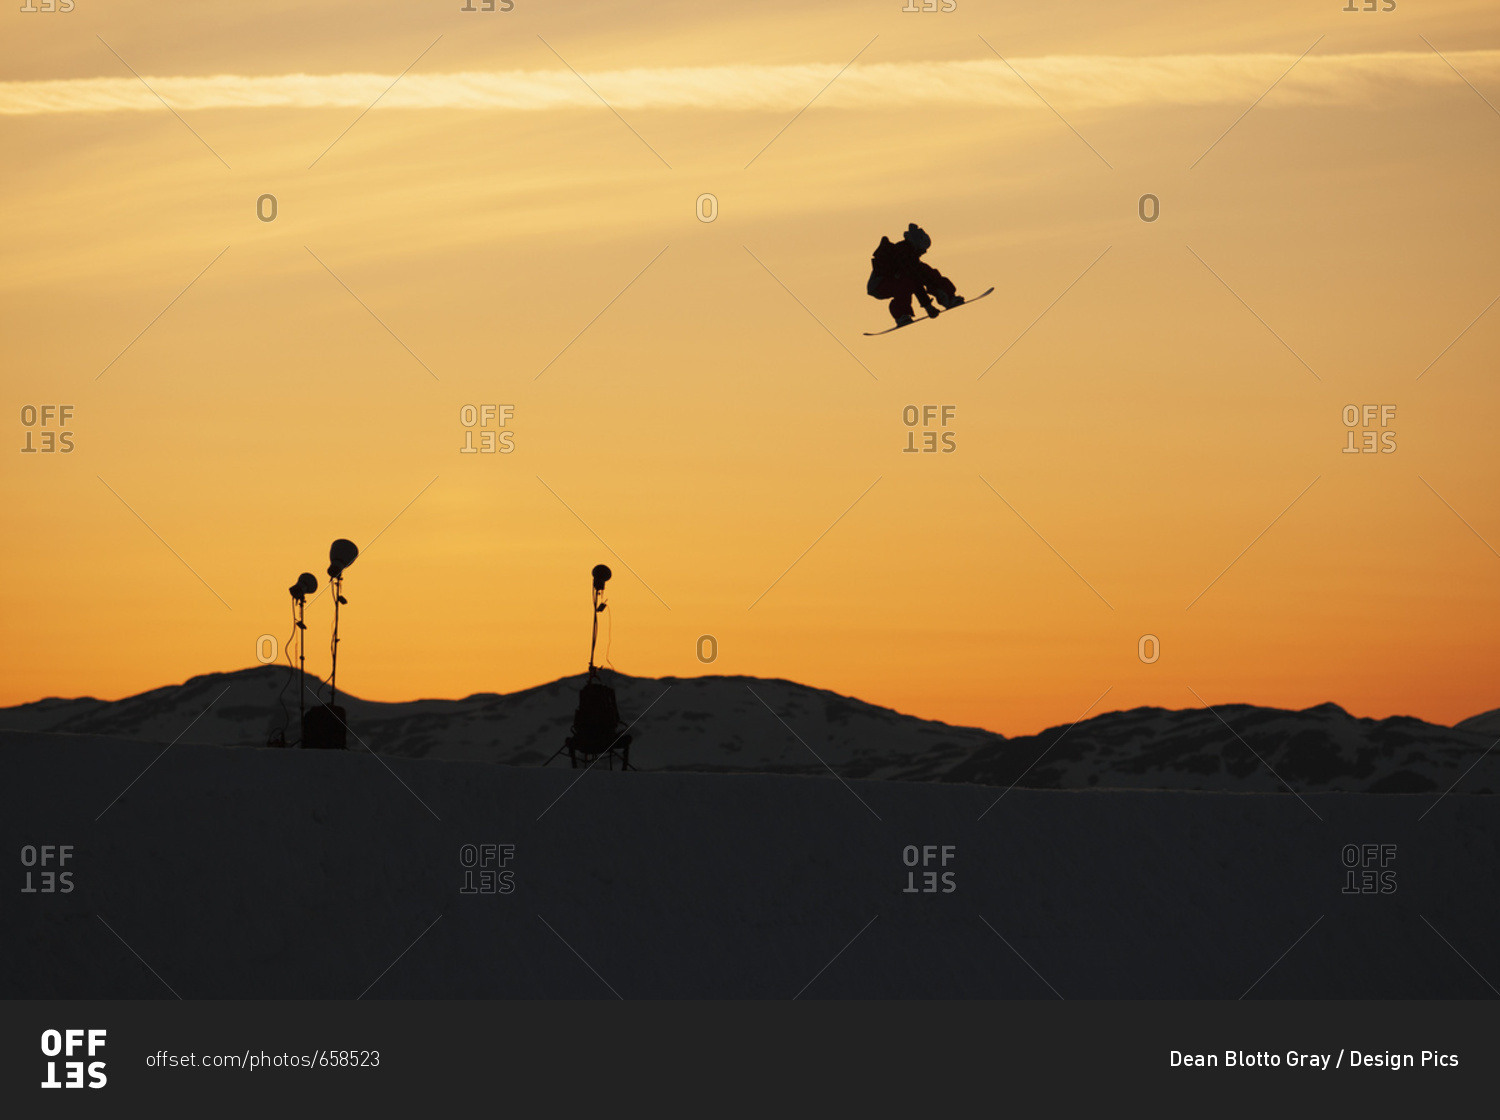 Silhouette Of A Snowboarder Jump In Mid-Air At Sunset; Norway